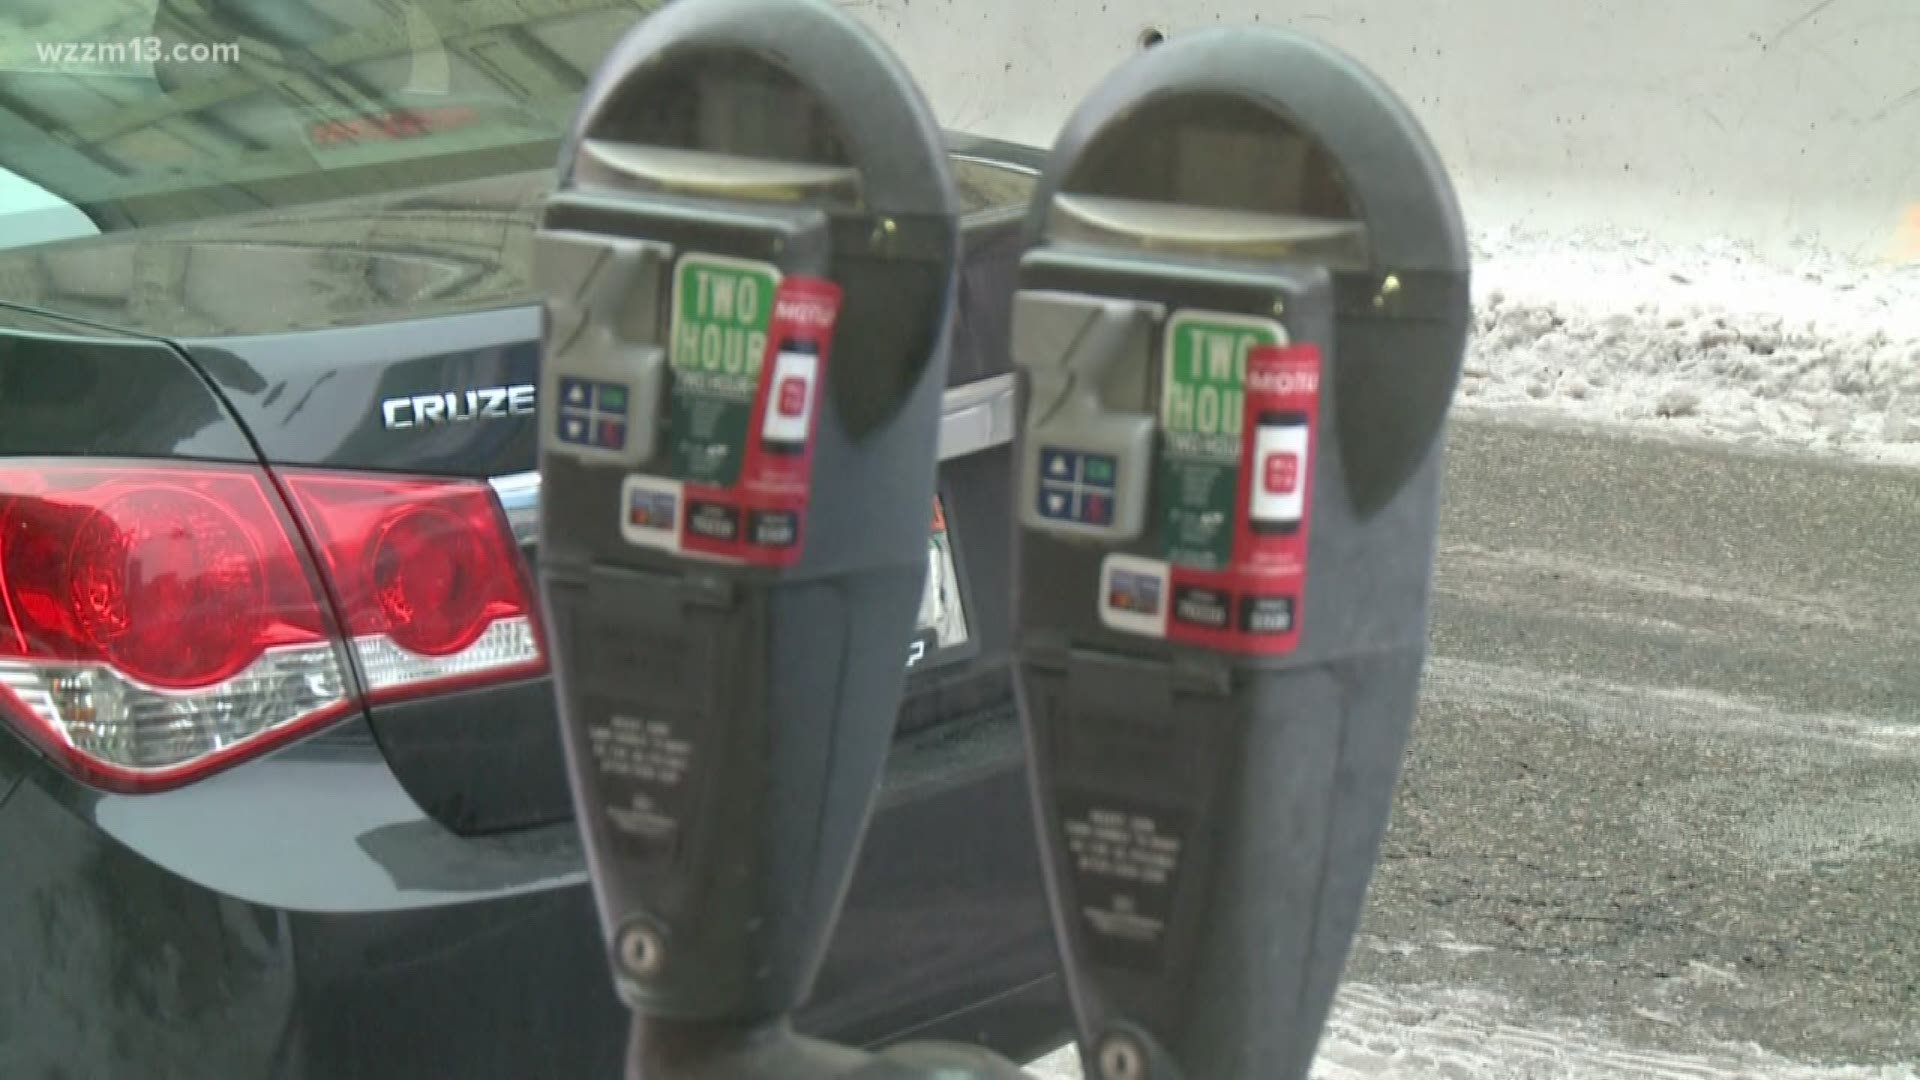 Business owners react to proposed meter changes